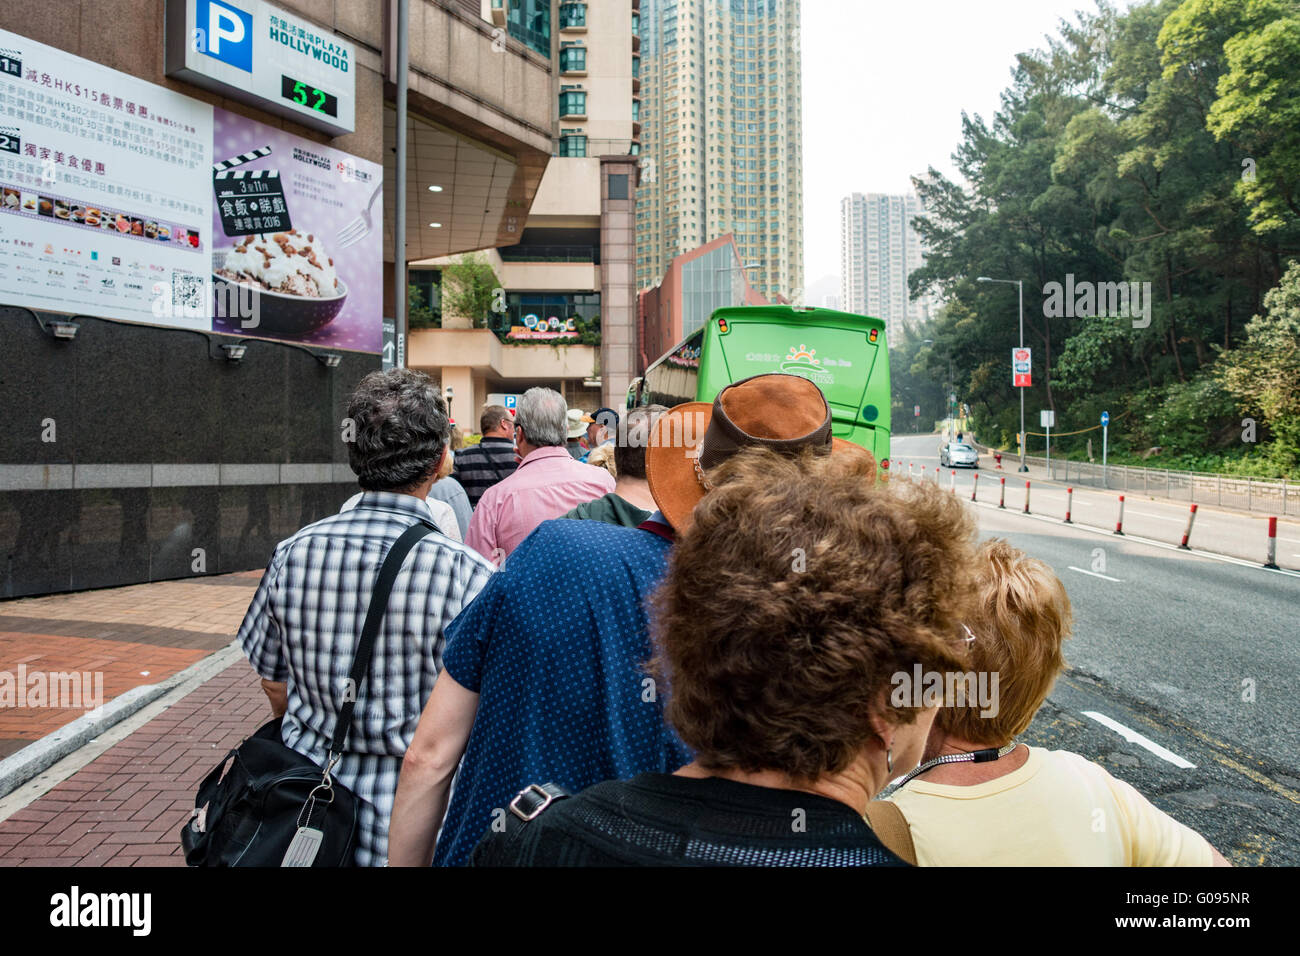 Tourists line up to board courtesy bus at Hollywood Plaza shopping centre in Hong Kong Stock Photo